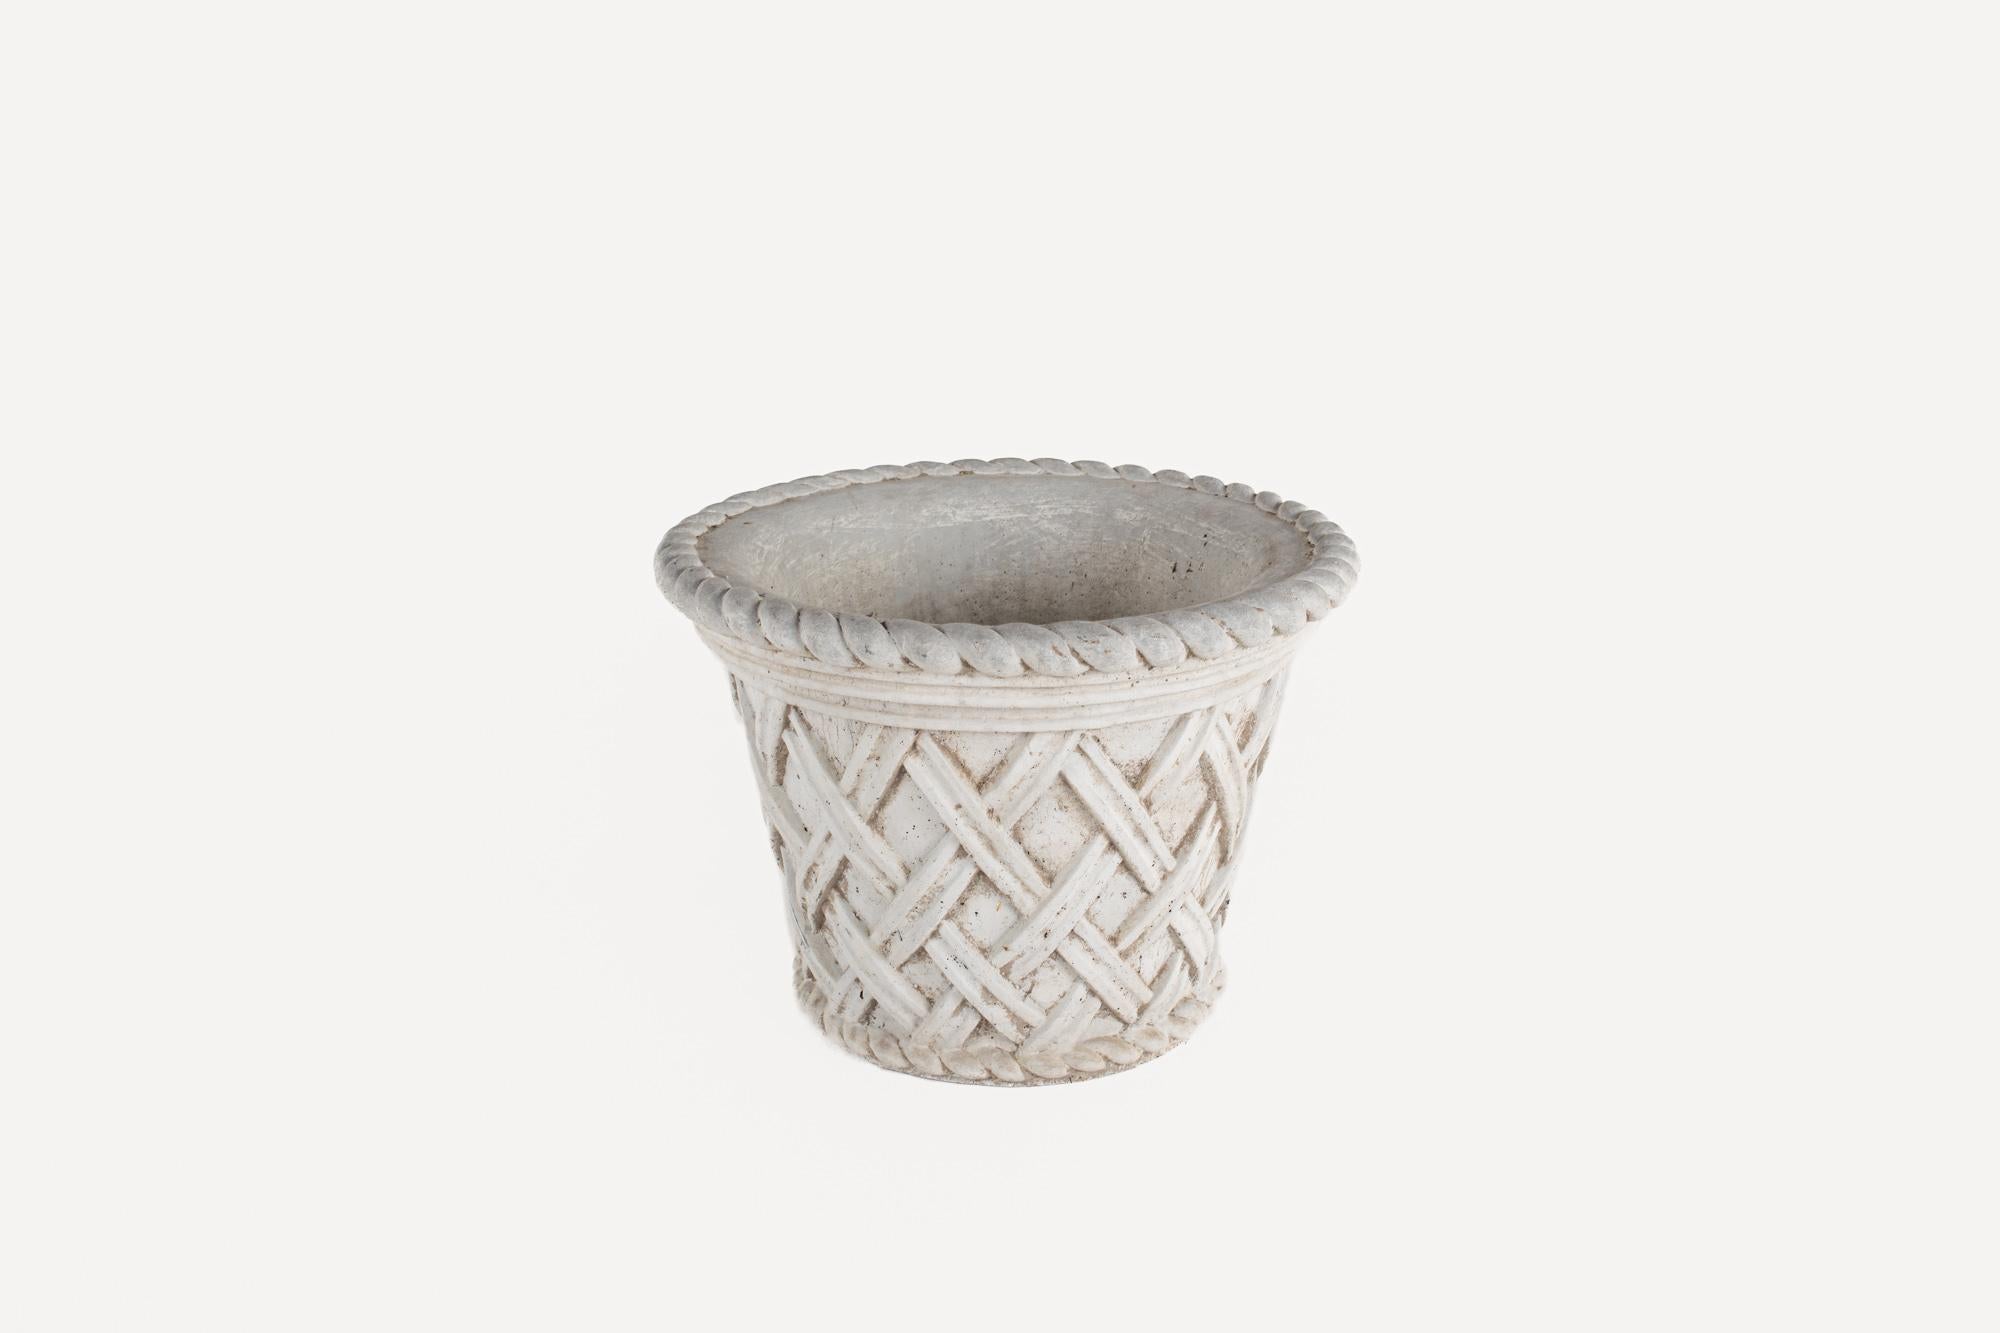 Mid Century Large Cement Rope Crosshatch Planter

The planter measures: 21 wide x 21 deep x 15.5 inches high

All pieces of furniture can be had in what we call restored vintage condition. That means the piece is restored upon purchase so it’s